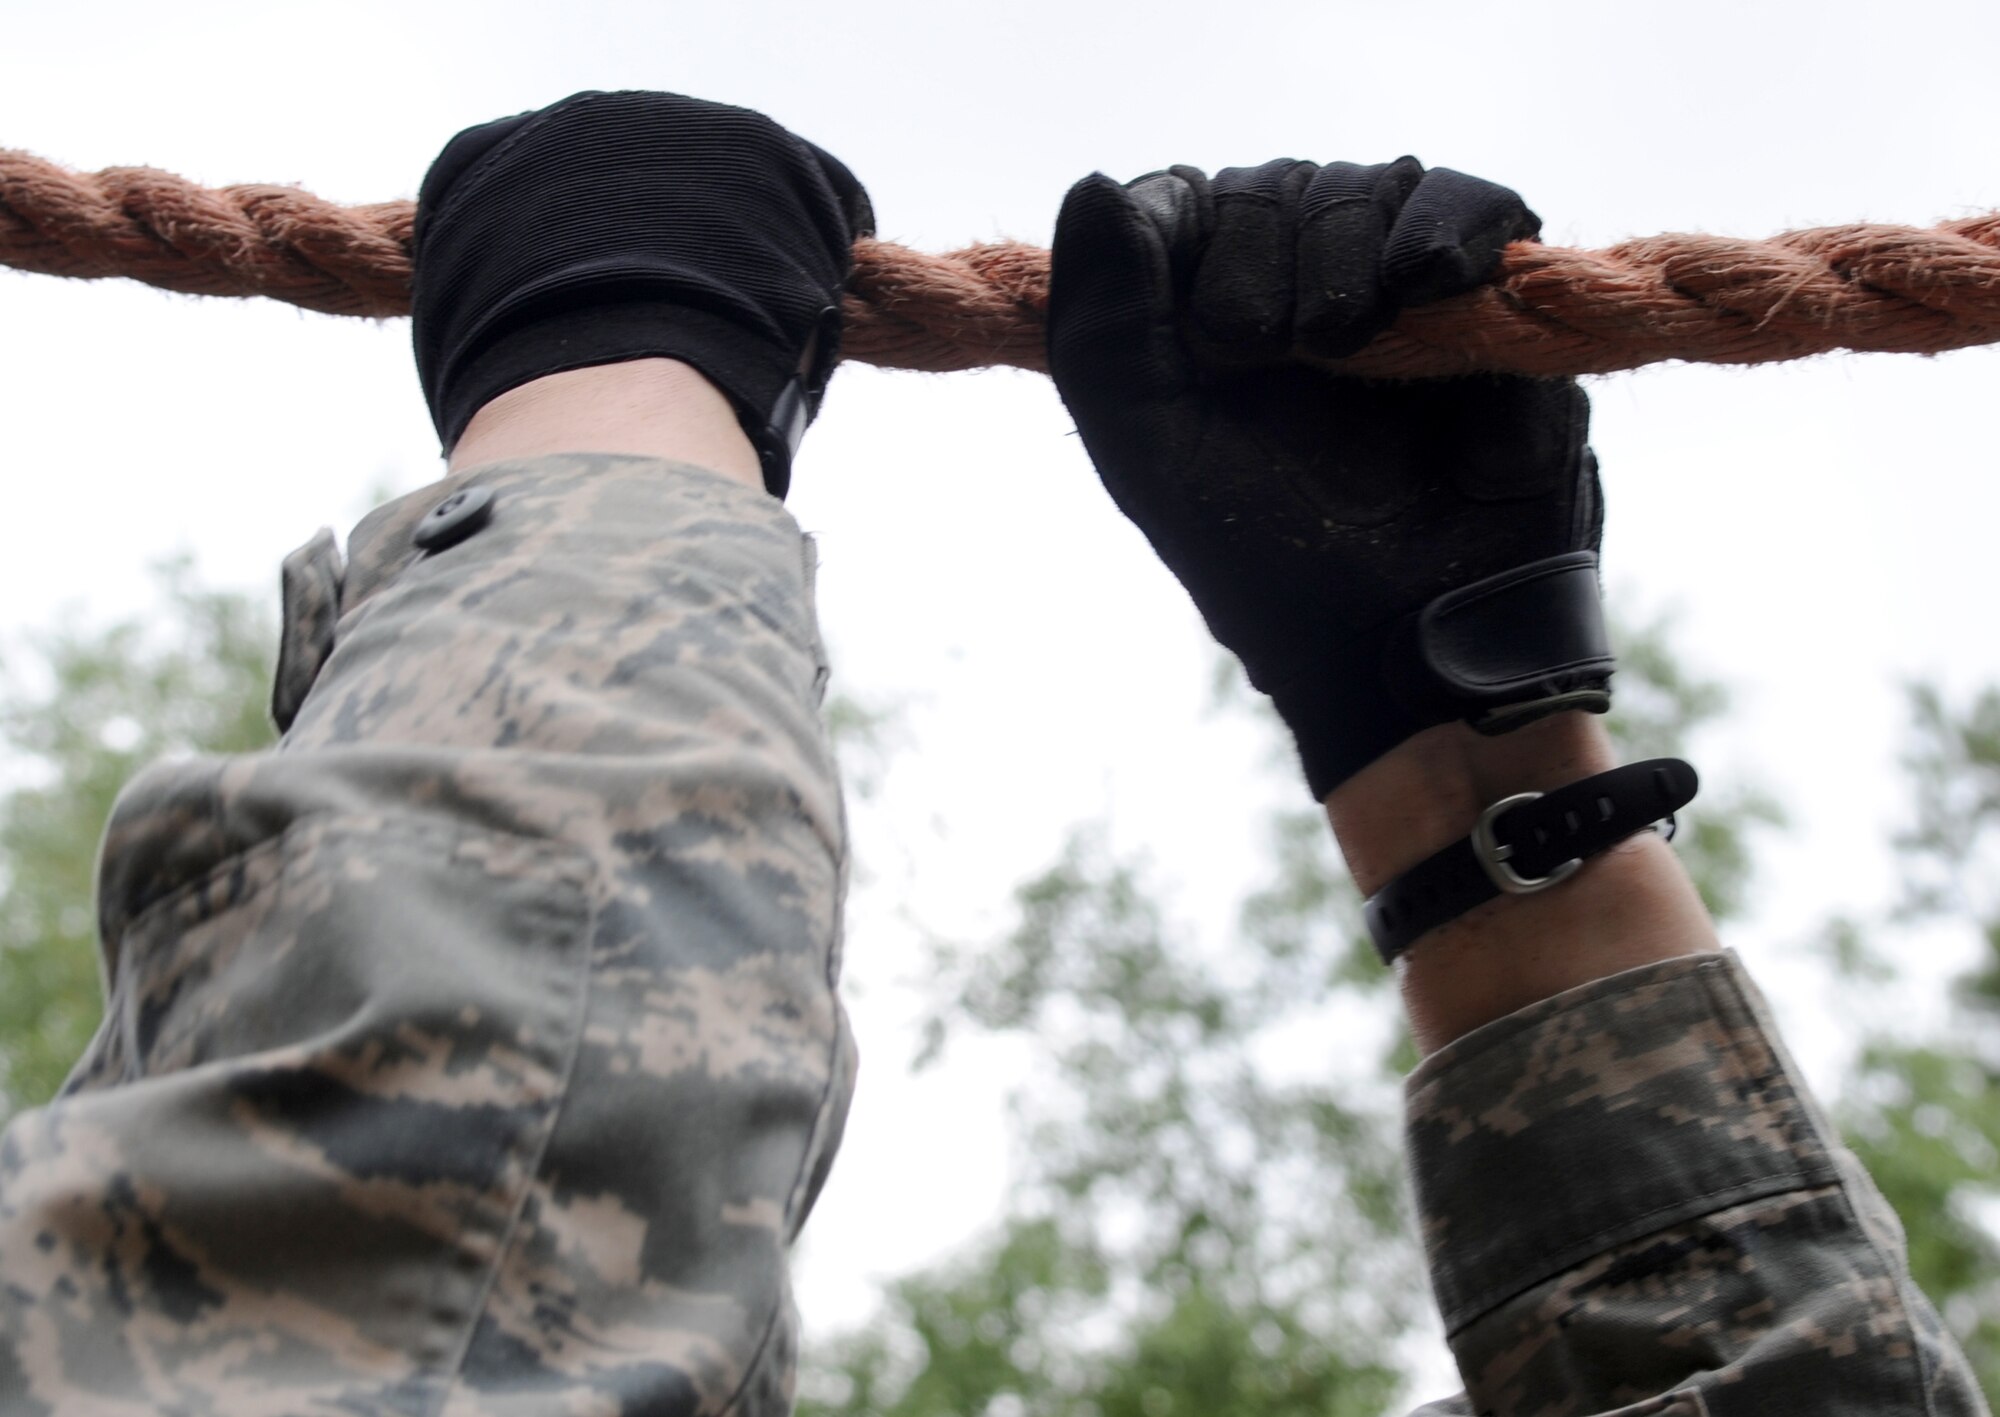 A U.S. Air Force Airman attempts to complete an obstacle during exercise Allied Strike 10, Grafenwoehr, Germany, July 23, 2010. Allied Strike is Europe's premier close air support (CAS) exercise, held annually to conduct robust, realistic CAS training that helps build partnership capacity among allied North Atlantic Treaty Organization nations and joint services while refining the latest operational CAS tactics. For more ALLIED STRIKE information go to www.usafe.af.mil/alliedstrike.asp. (U.S. Air Force photo by Senior Airman Caleb Pierce)